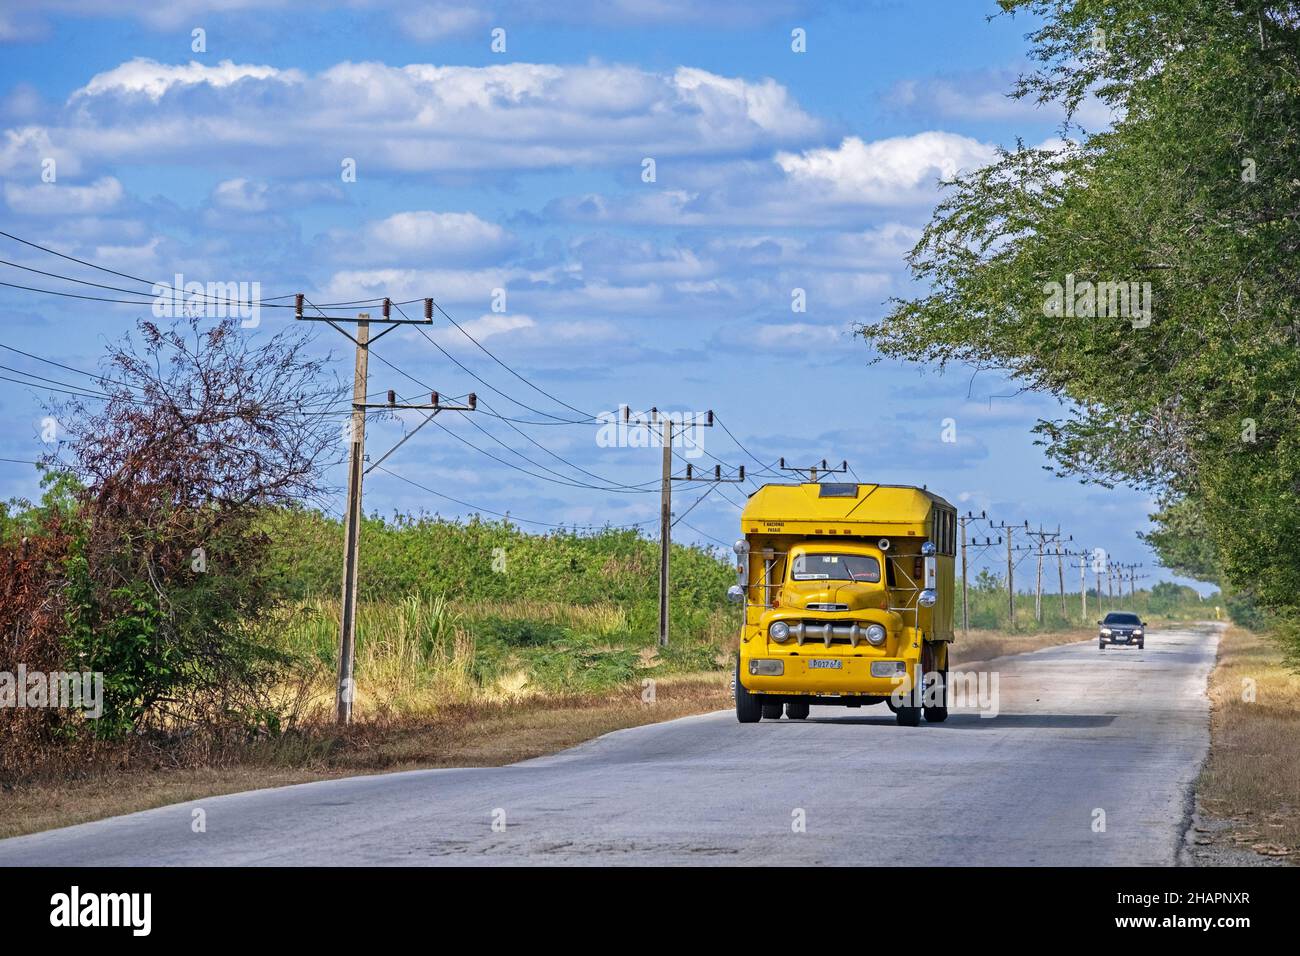 Camione, oldtimer truck converted into public bus driving along the Carretera Central / Central Road, highway spanning the length of the island Cuba Stock Photo